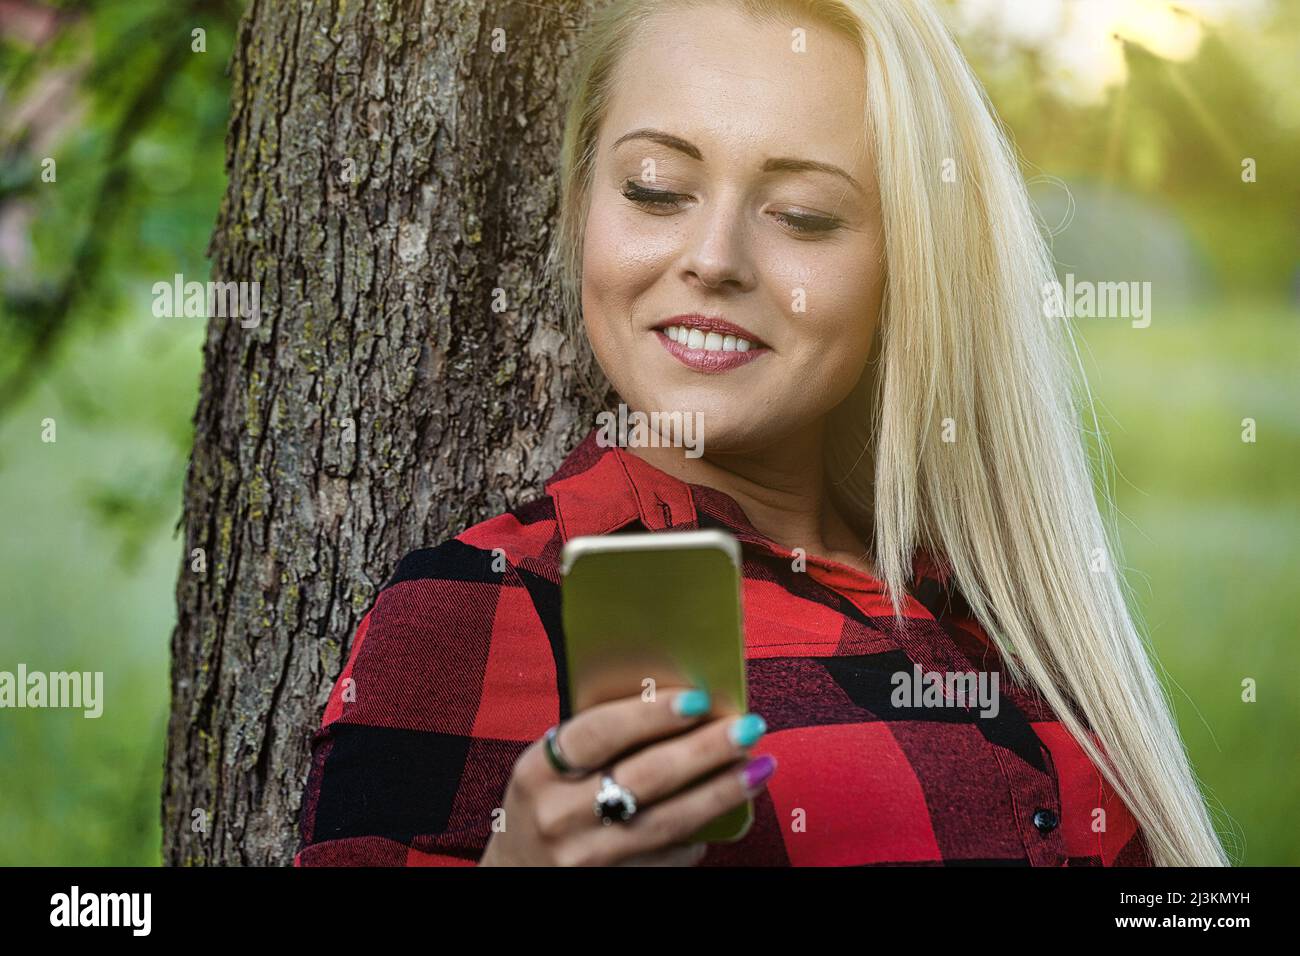 Young woman leaning against a tree trunk in a park with a mobile phone in her hands smiling happily backlit by the warm glow of the sun through trees Stock Photo